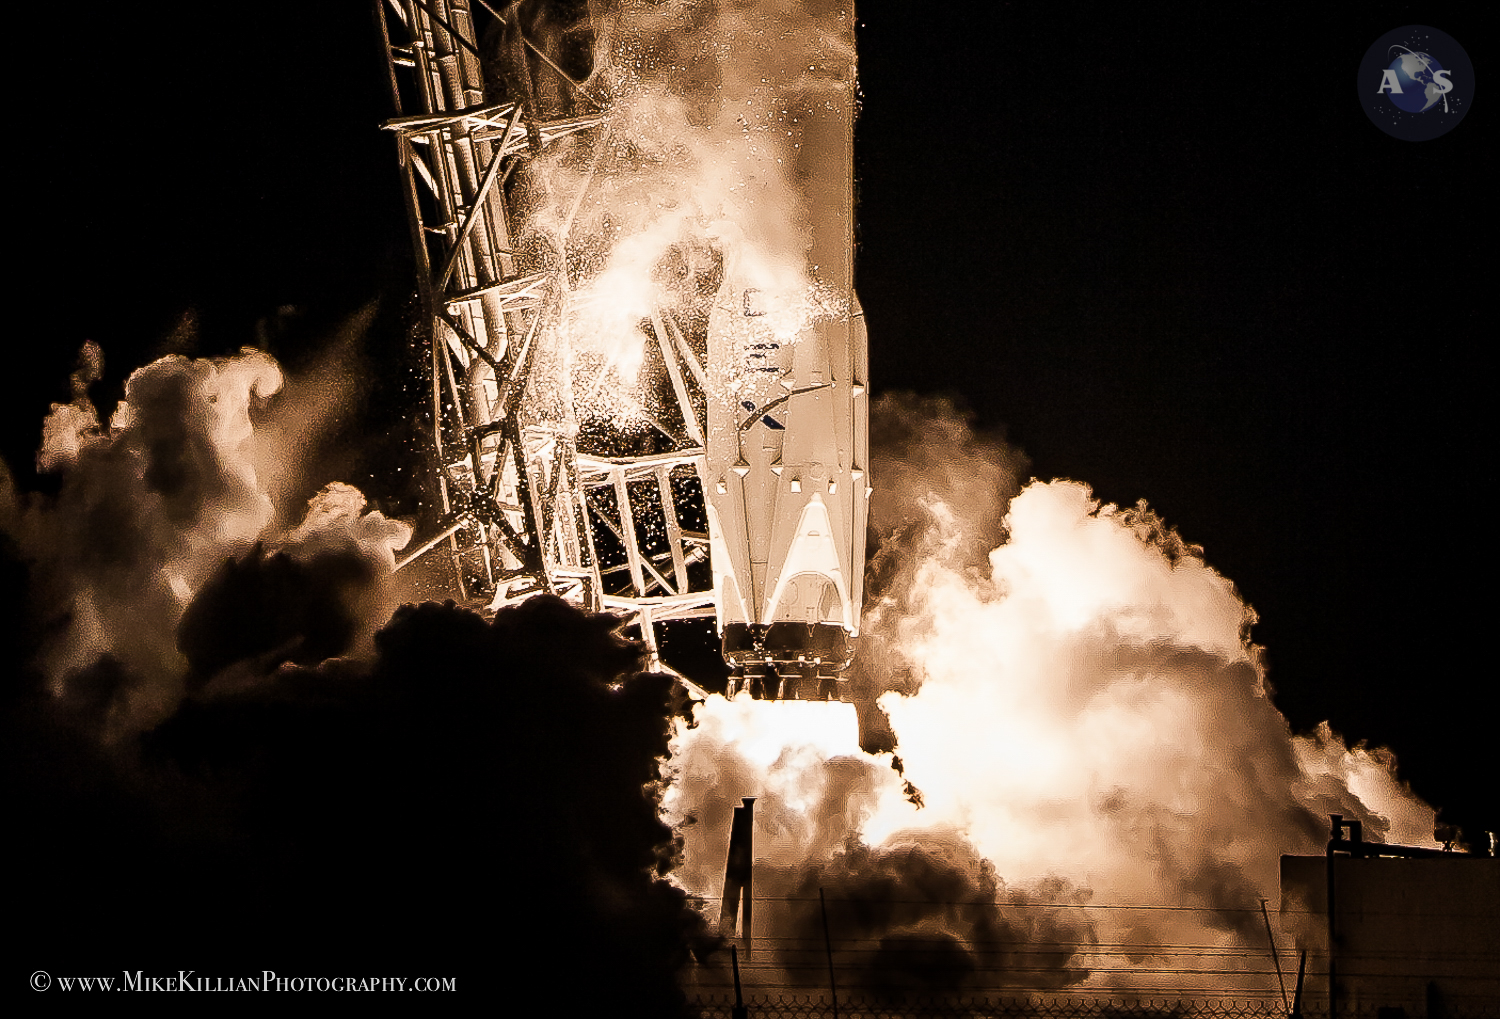 LIFTOFF of SpaceX's Falcon-9 booster Saturday morning, Jan. 10, 2014, kicking off the first U.S. launch of 2015 and the company's fifth NASA-contracted Dragon resupply mission to the International Space Station. Photo Credit: Mike Killian / AmericaSpace